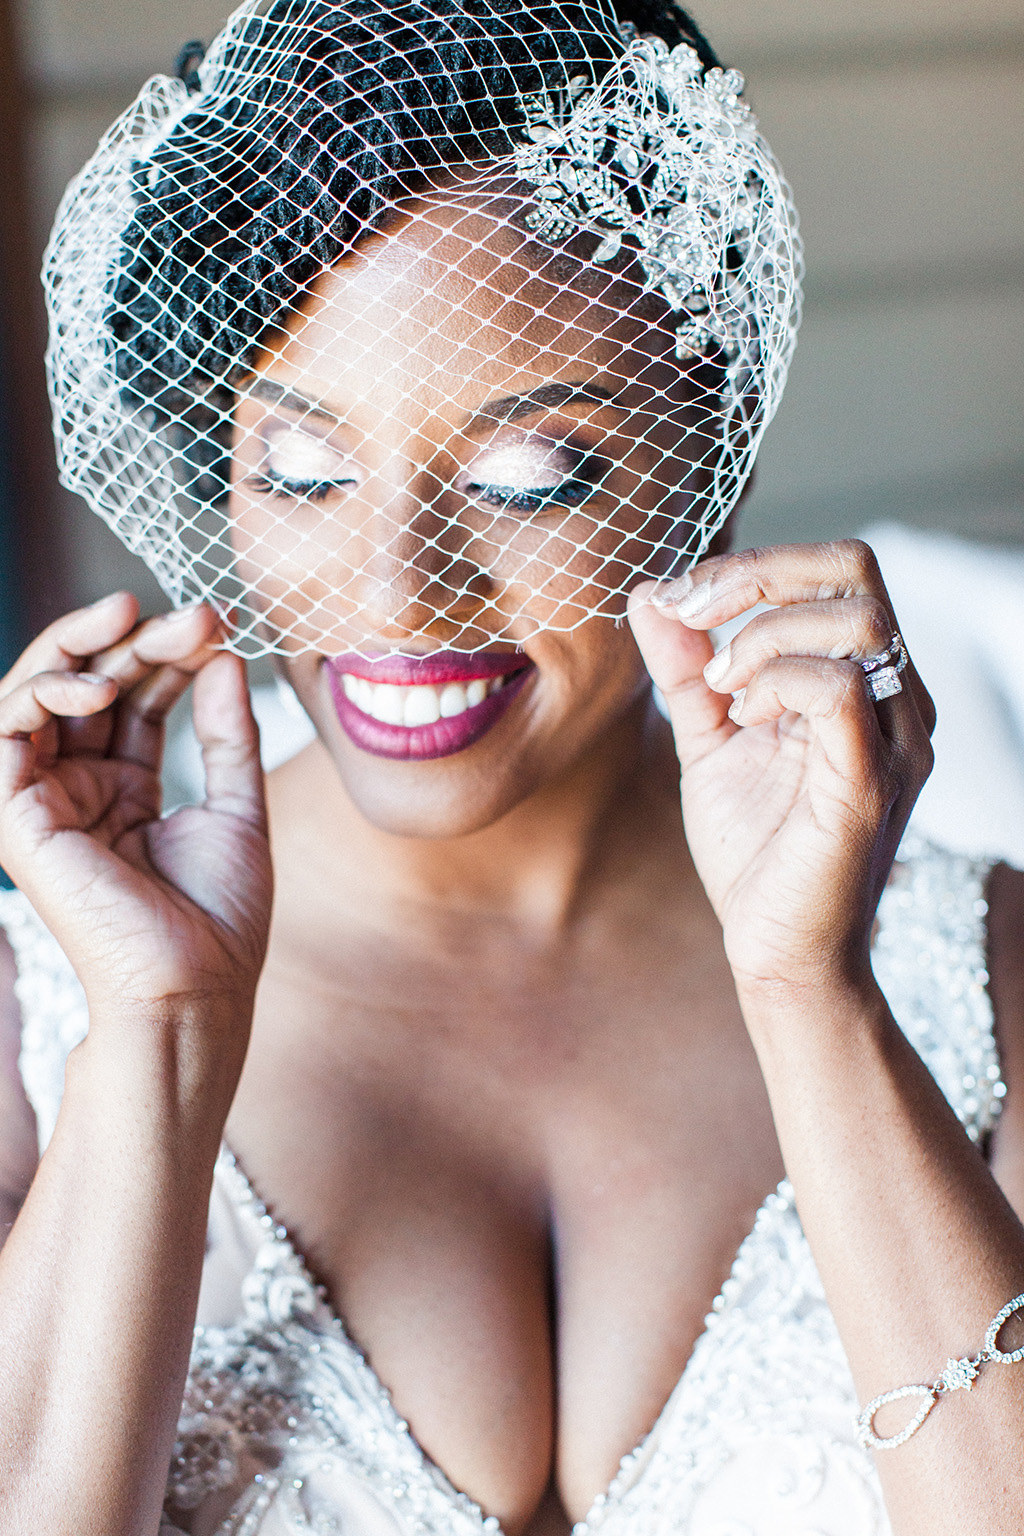 View More: http://birdsofafeatherphotos.pass.us/alex-and-janell